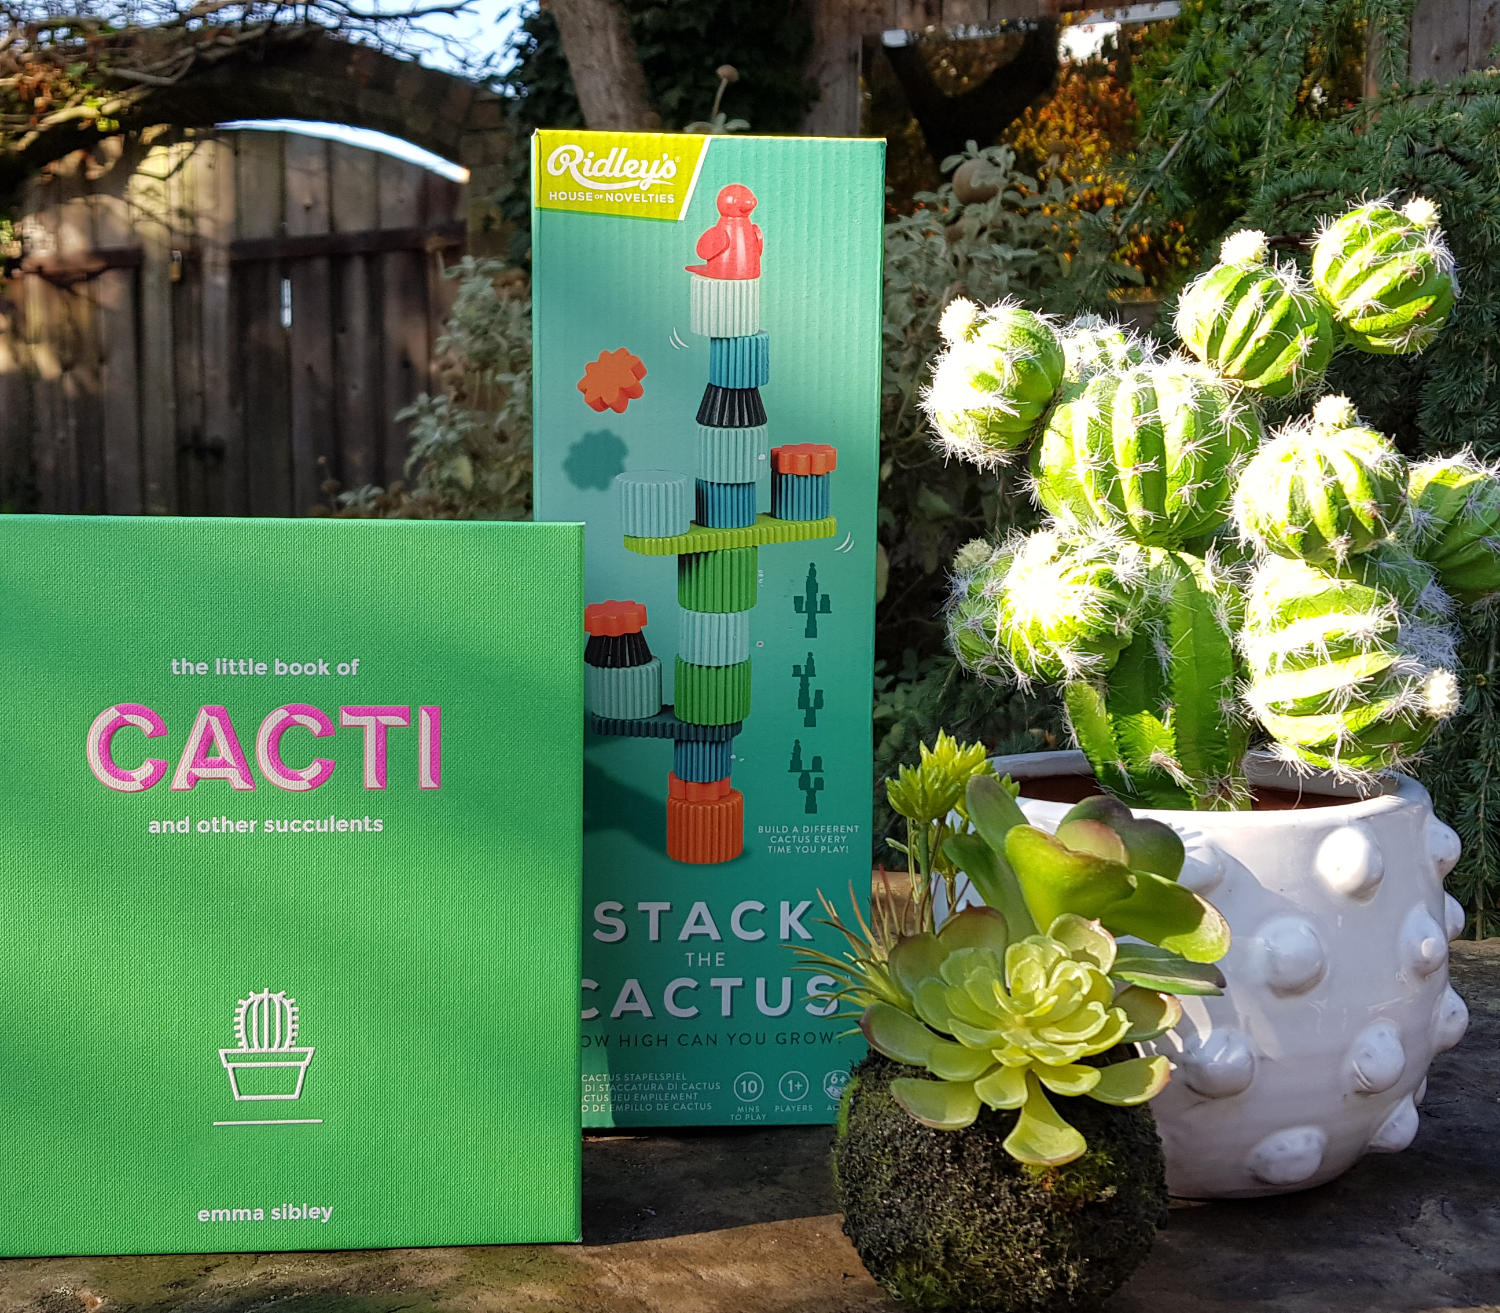 cacti_and_succulents_book_and_stack_cactus_game.jpg